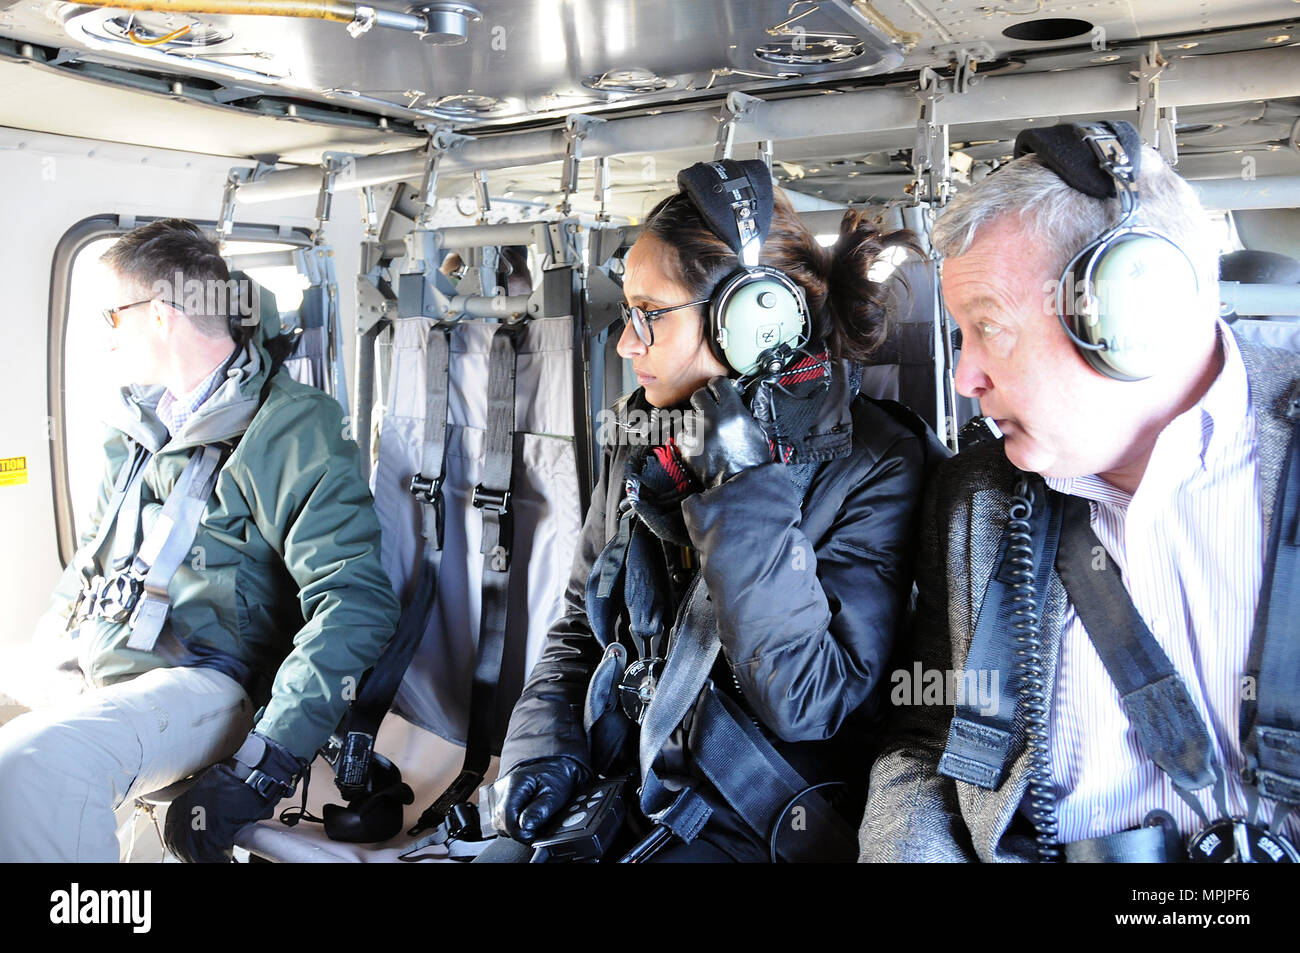 Sophia Lalani (middle), Defense and Foreign Policy advisor to U.S. Senator Cory Booker, participates in an aerial tour March 17 of Joint Base McGuire-Dix-Lakehurst, New Jersey.  The day was designed to show the various ranges and training sites of the joint base. Joint Base McGuire-Dix-Lakehurst is home to more than 80 mission partners who provide a wide range of combat capability. Stock Photo